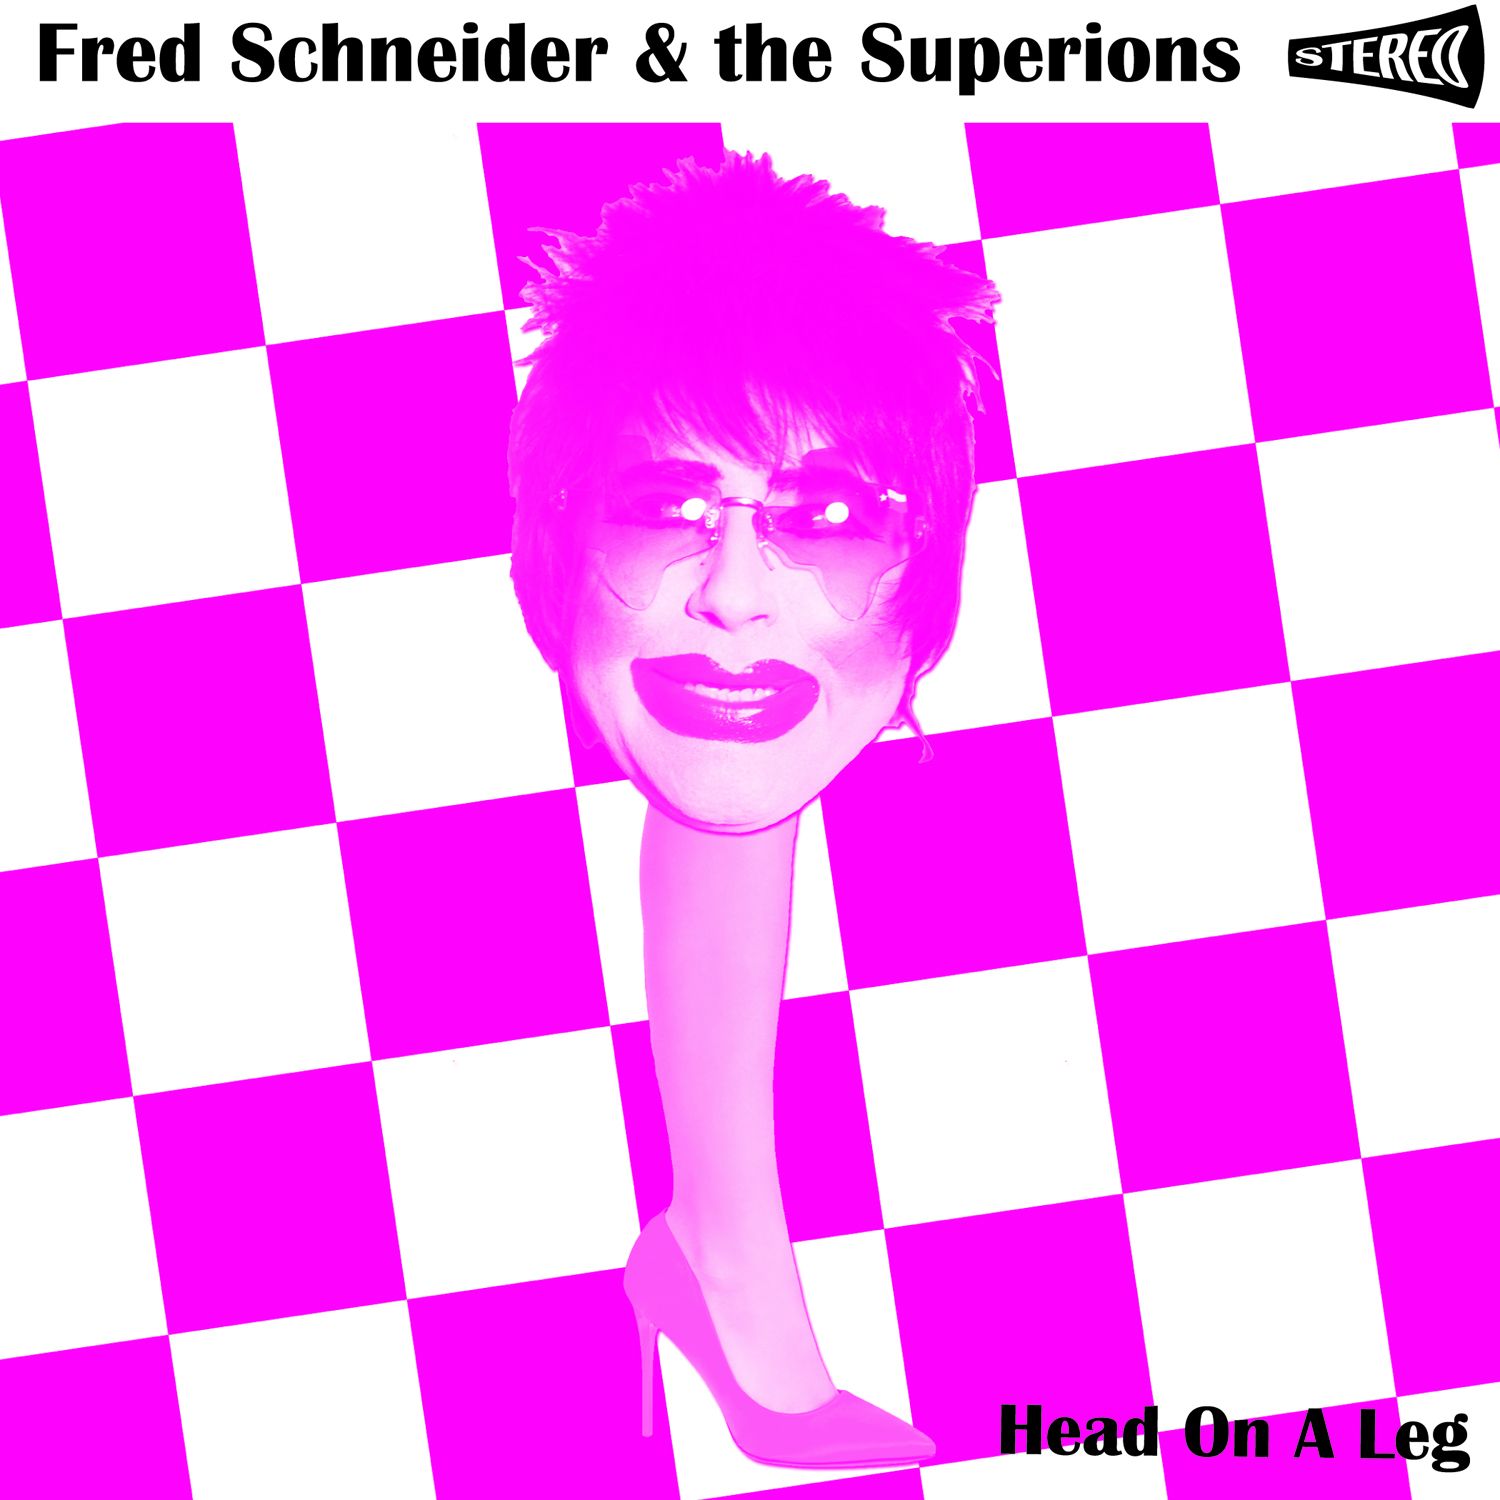 FRED SCHNEIDER & THE SUPERIONS / HEAD ON A LEG [COLORED 7"]